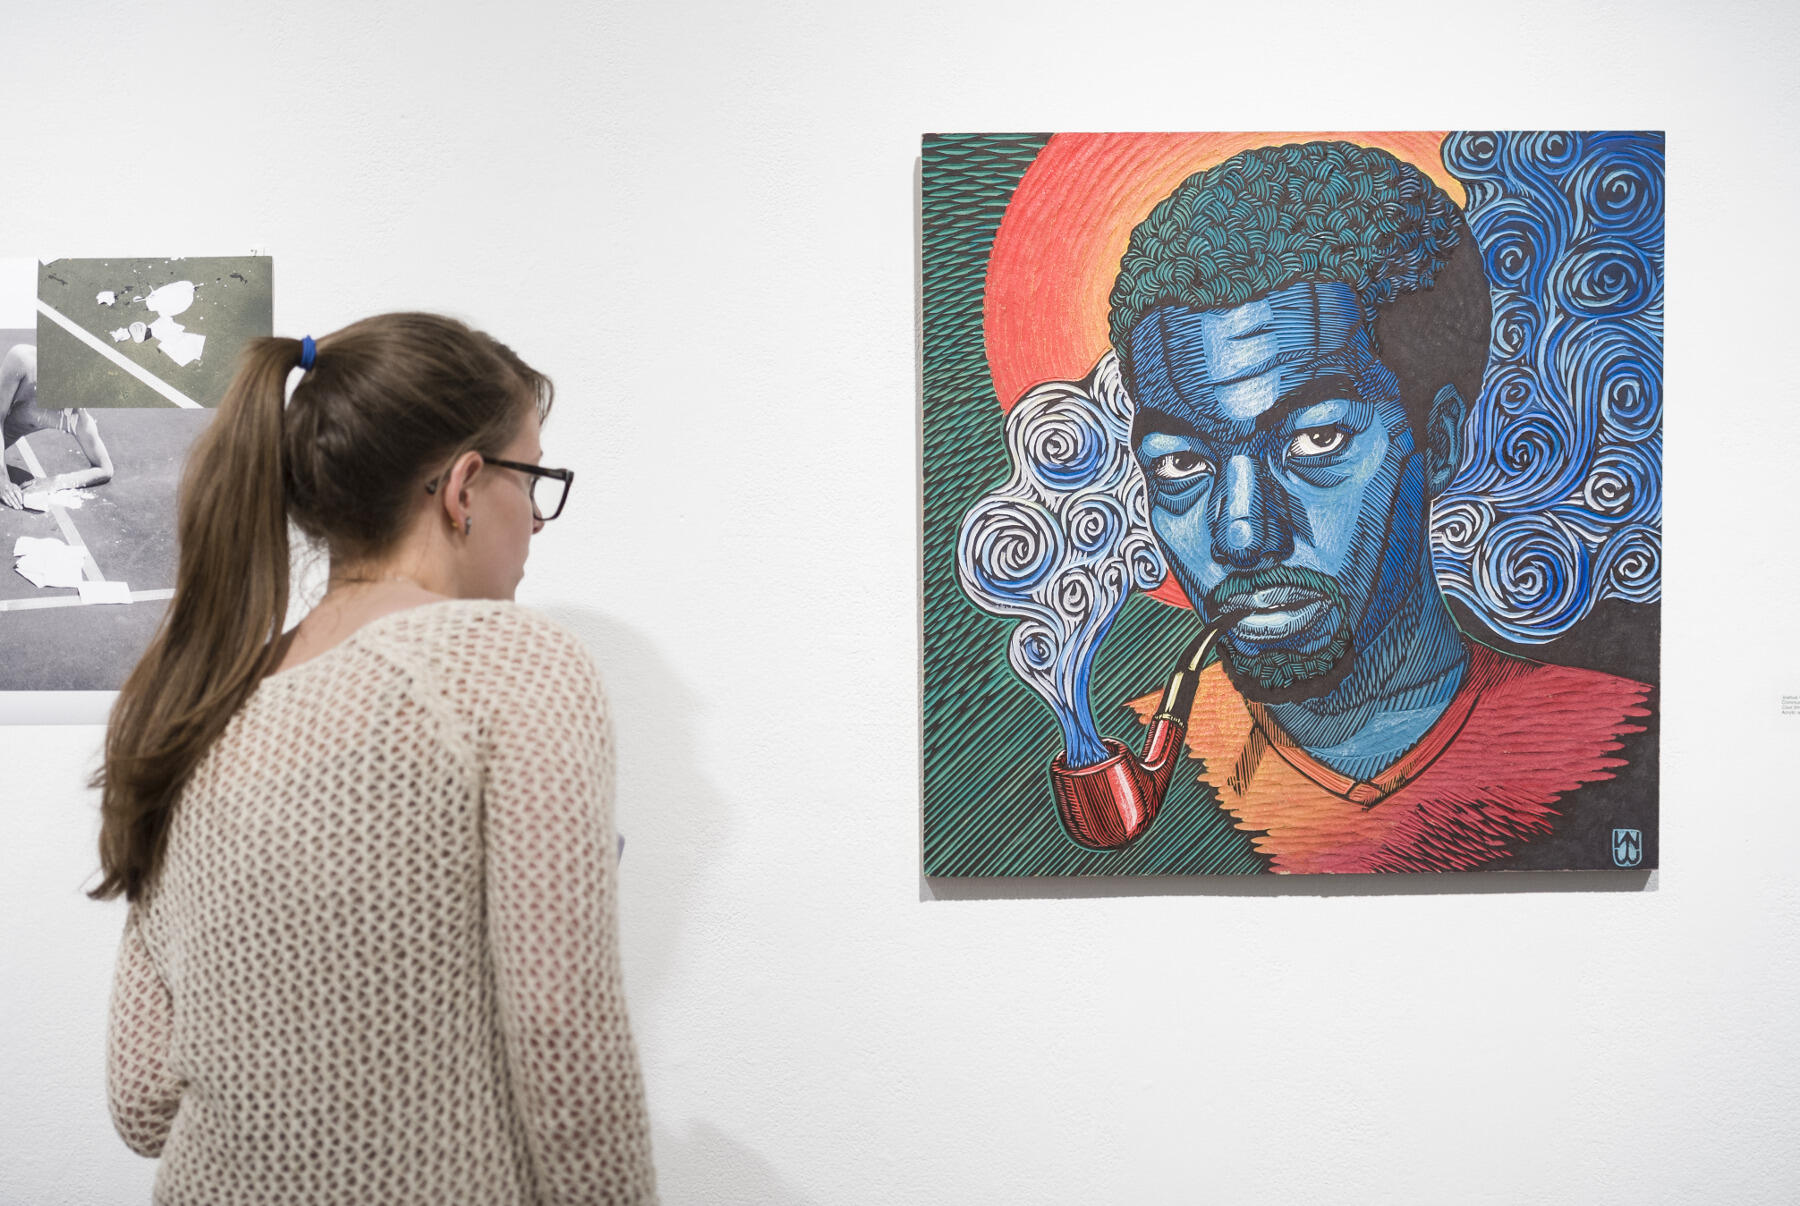 A student views artwork at the 2015 Juried Fine Arts, Design & Kinetic Imaging Exhibition at the Anderson Gallery. (File photo)